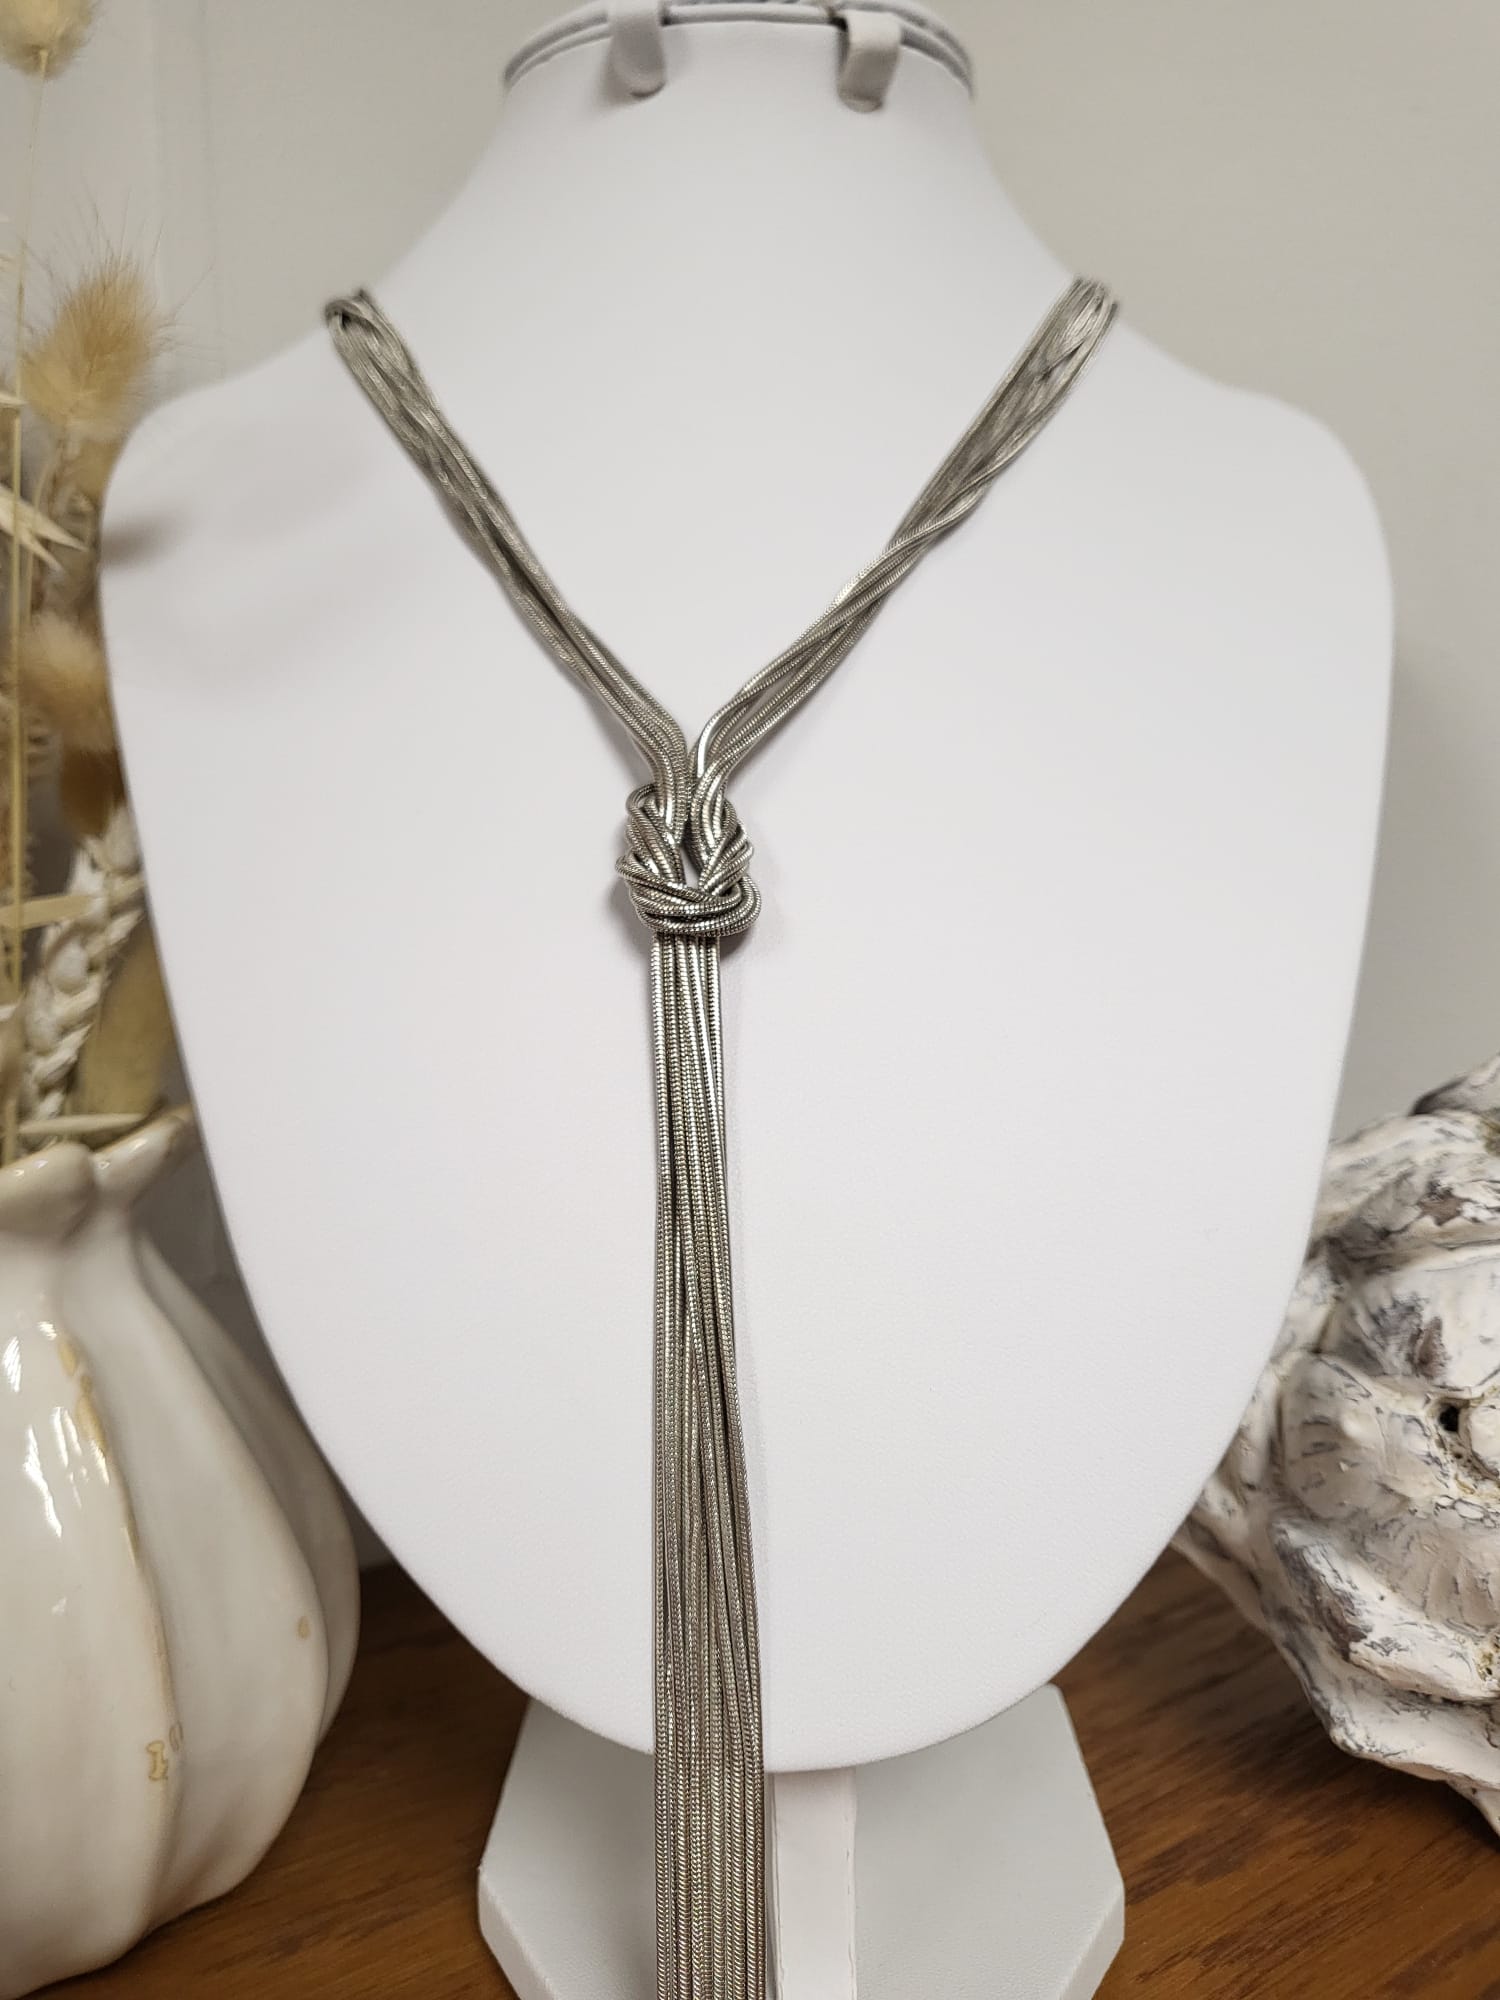 Long plain chain silver necklace with knot